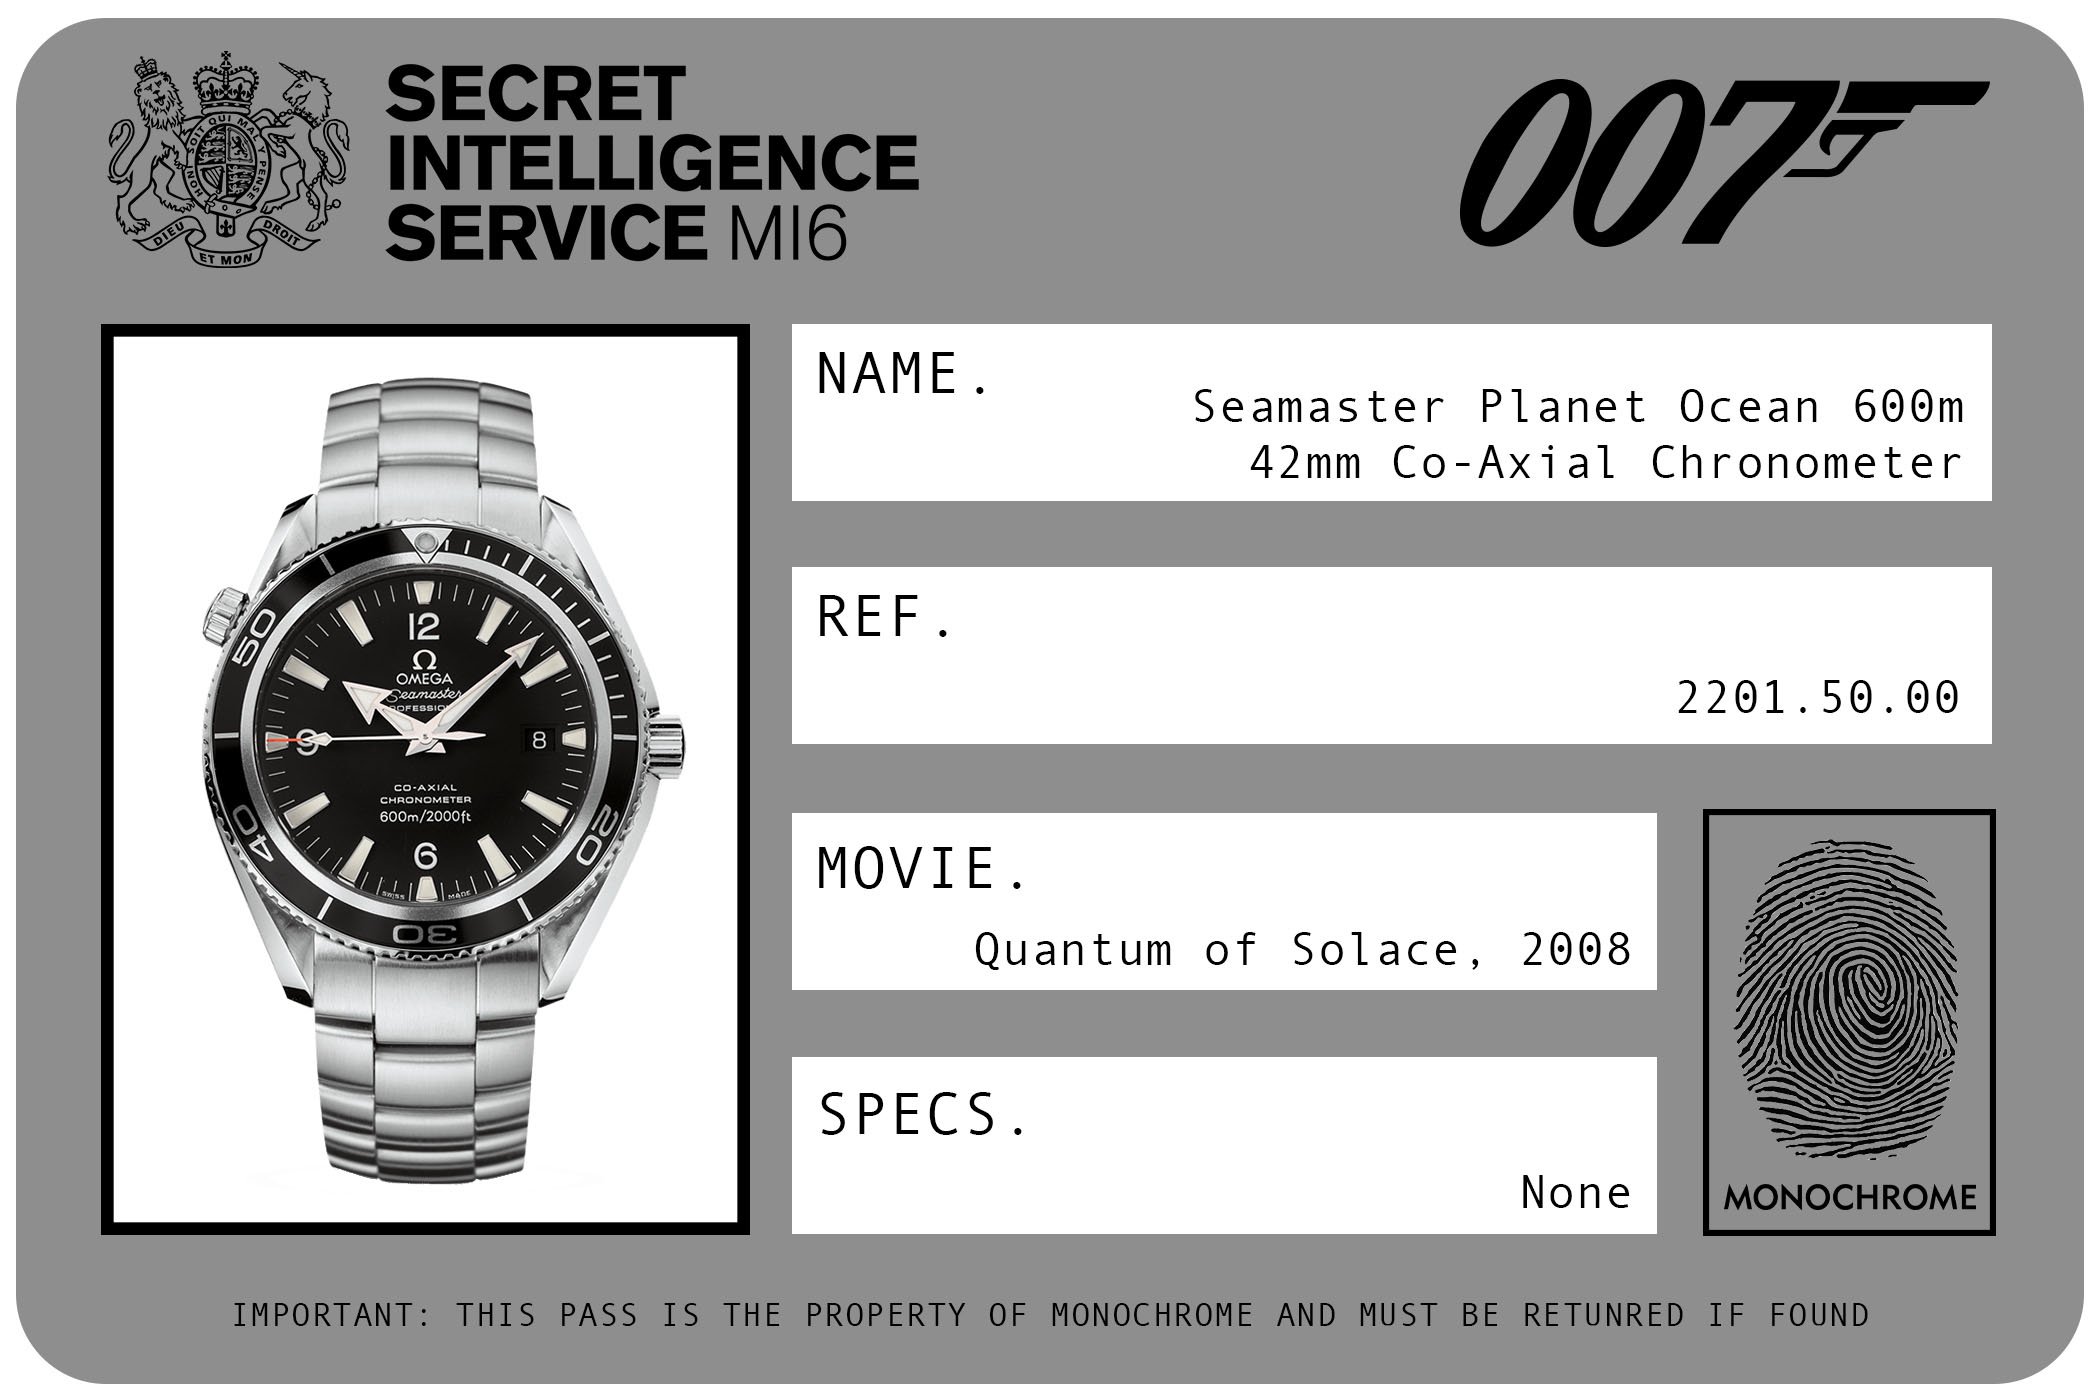 2008 - Omega Seamaster Planet Ocean 600m 42mm Co-Axial Chronometer 2201.50.50 James Bond Quantum of Solace ID Card